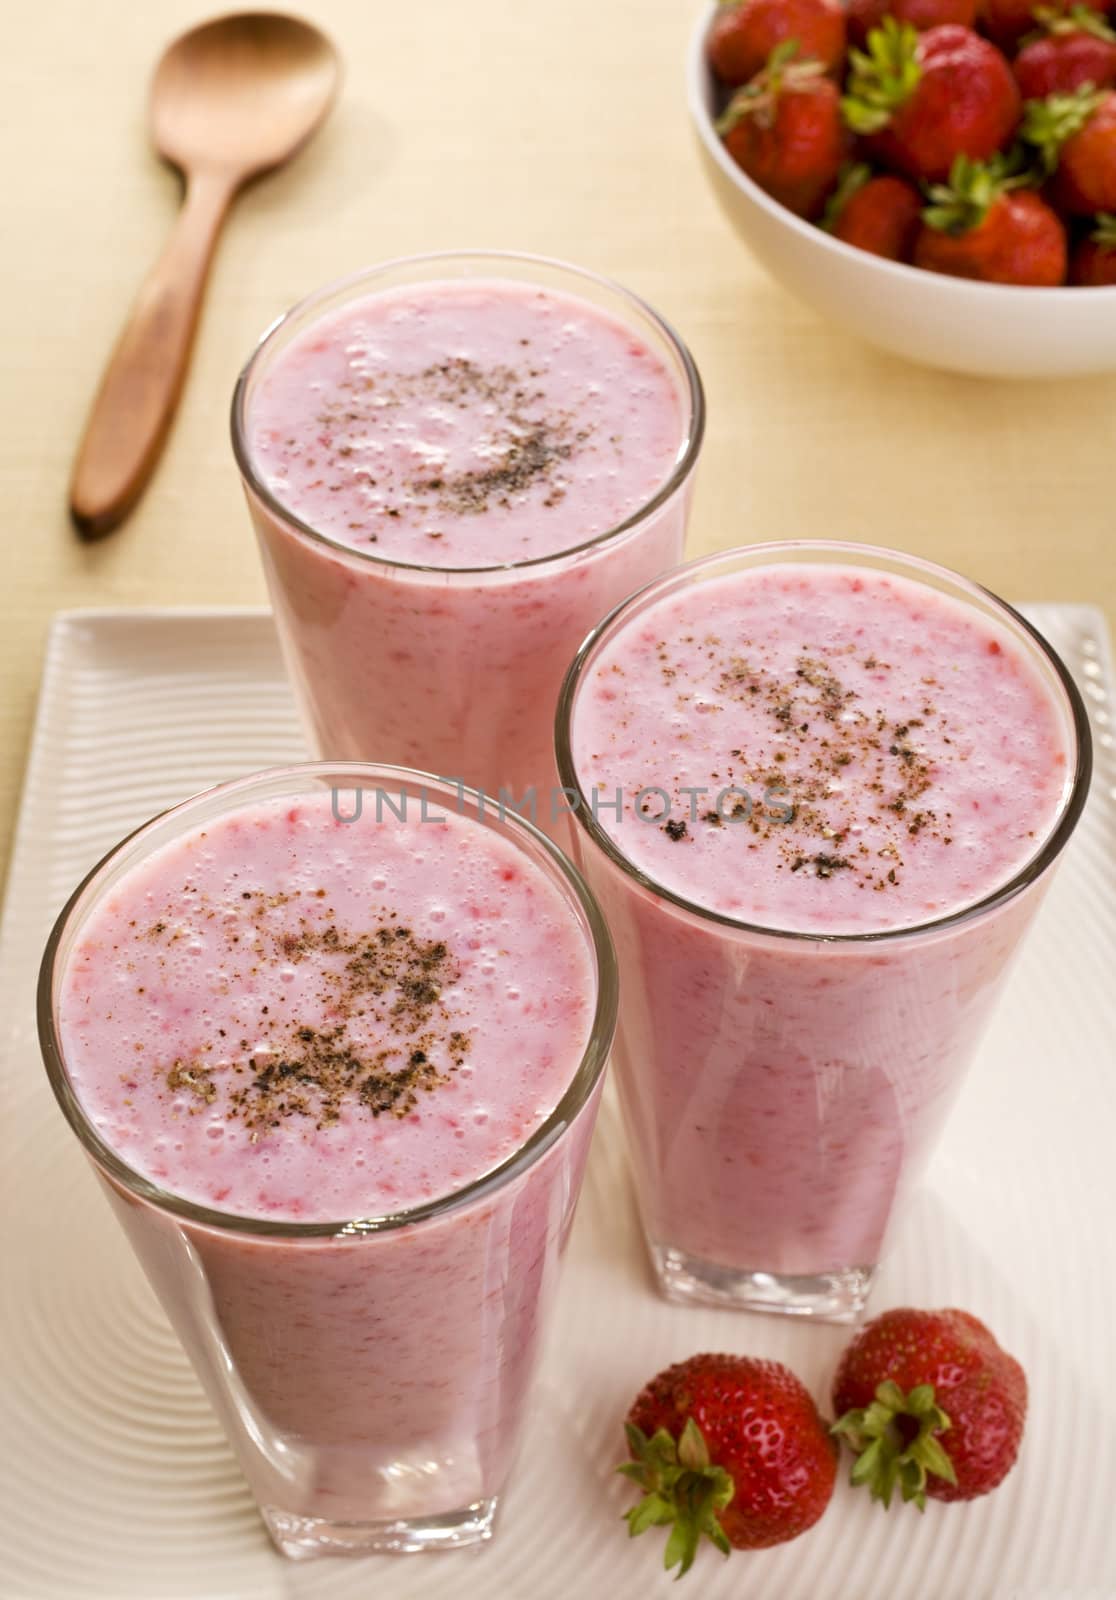 Very light and bright, three glasses of healthy strawberry lassi, an Indian drink made from buttermilk and fresh strawberries.